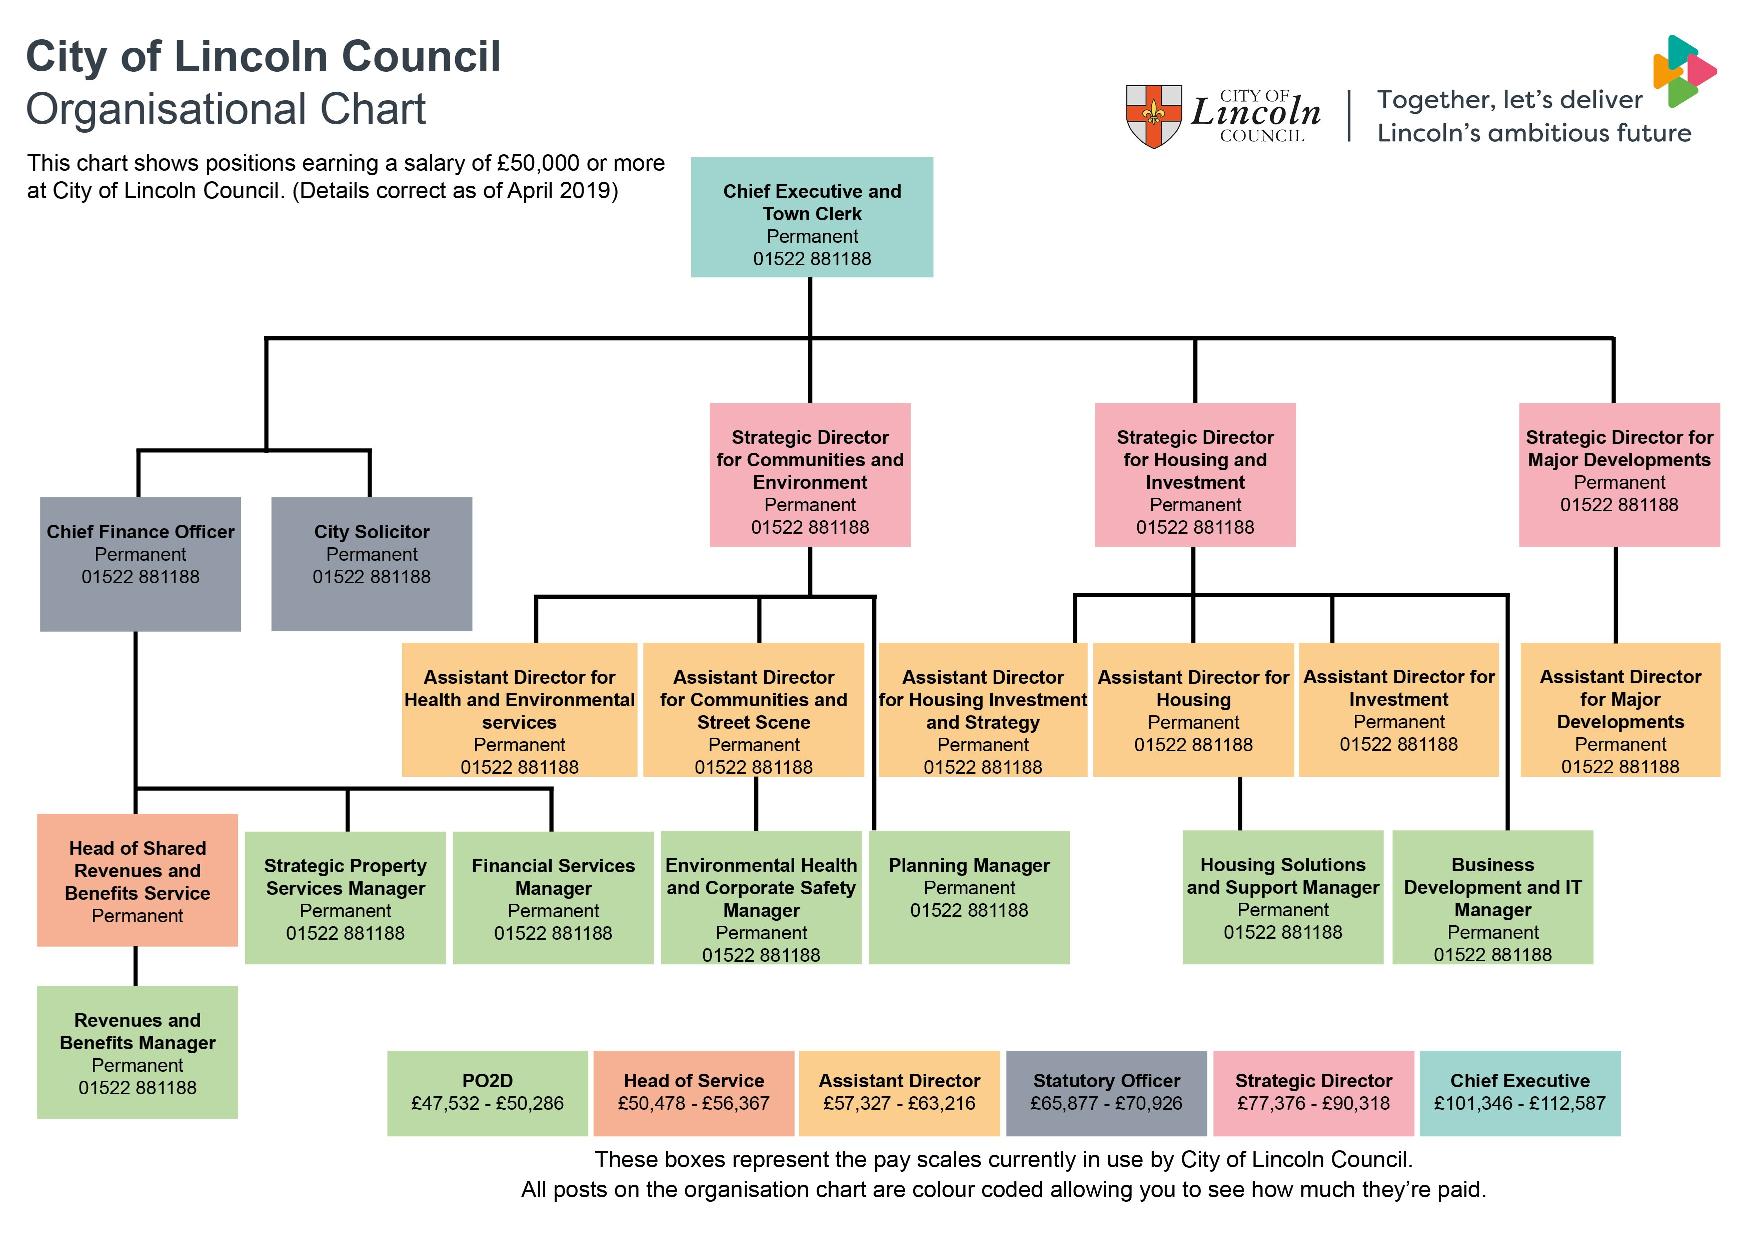 City of Lincoln council  organisational chart